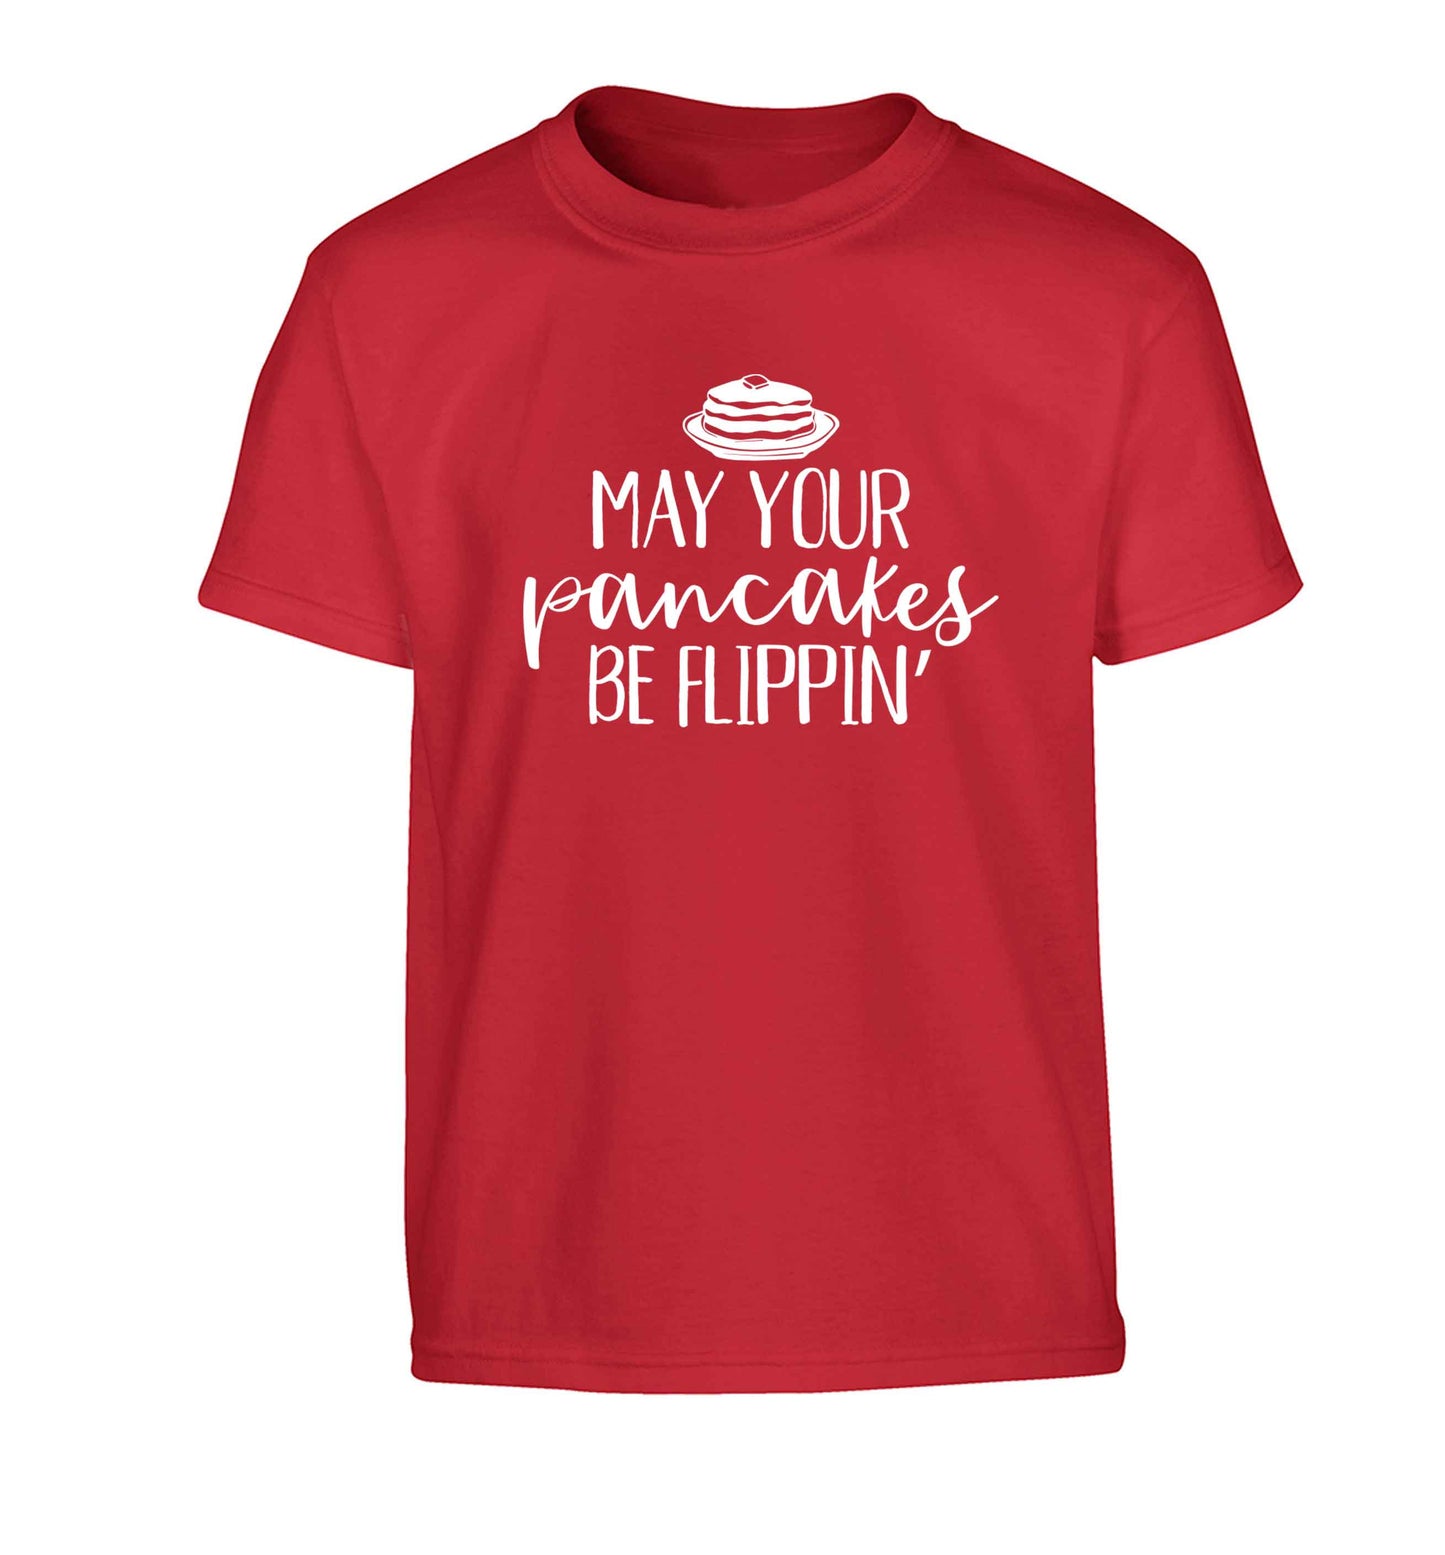 May your pancakes be flippin' Children's red Tshirt 12-13 Years